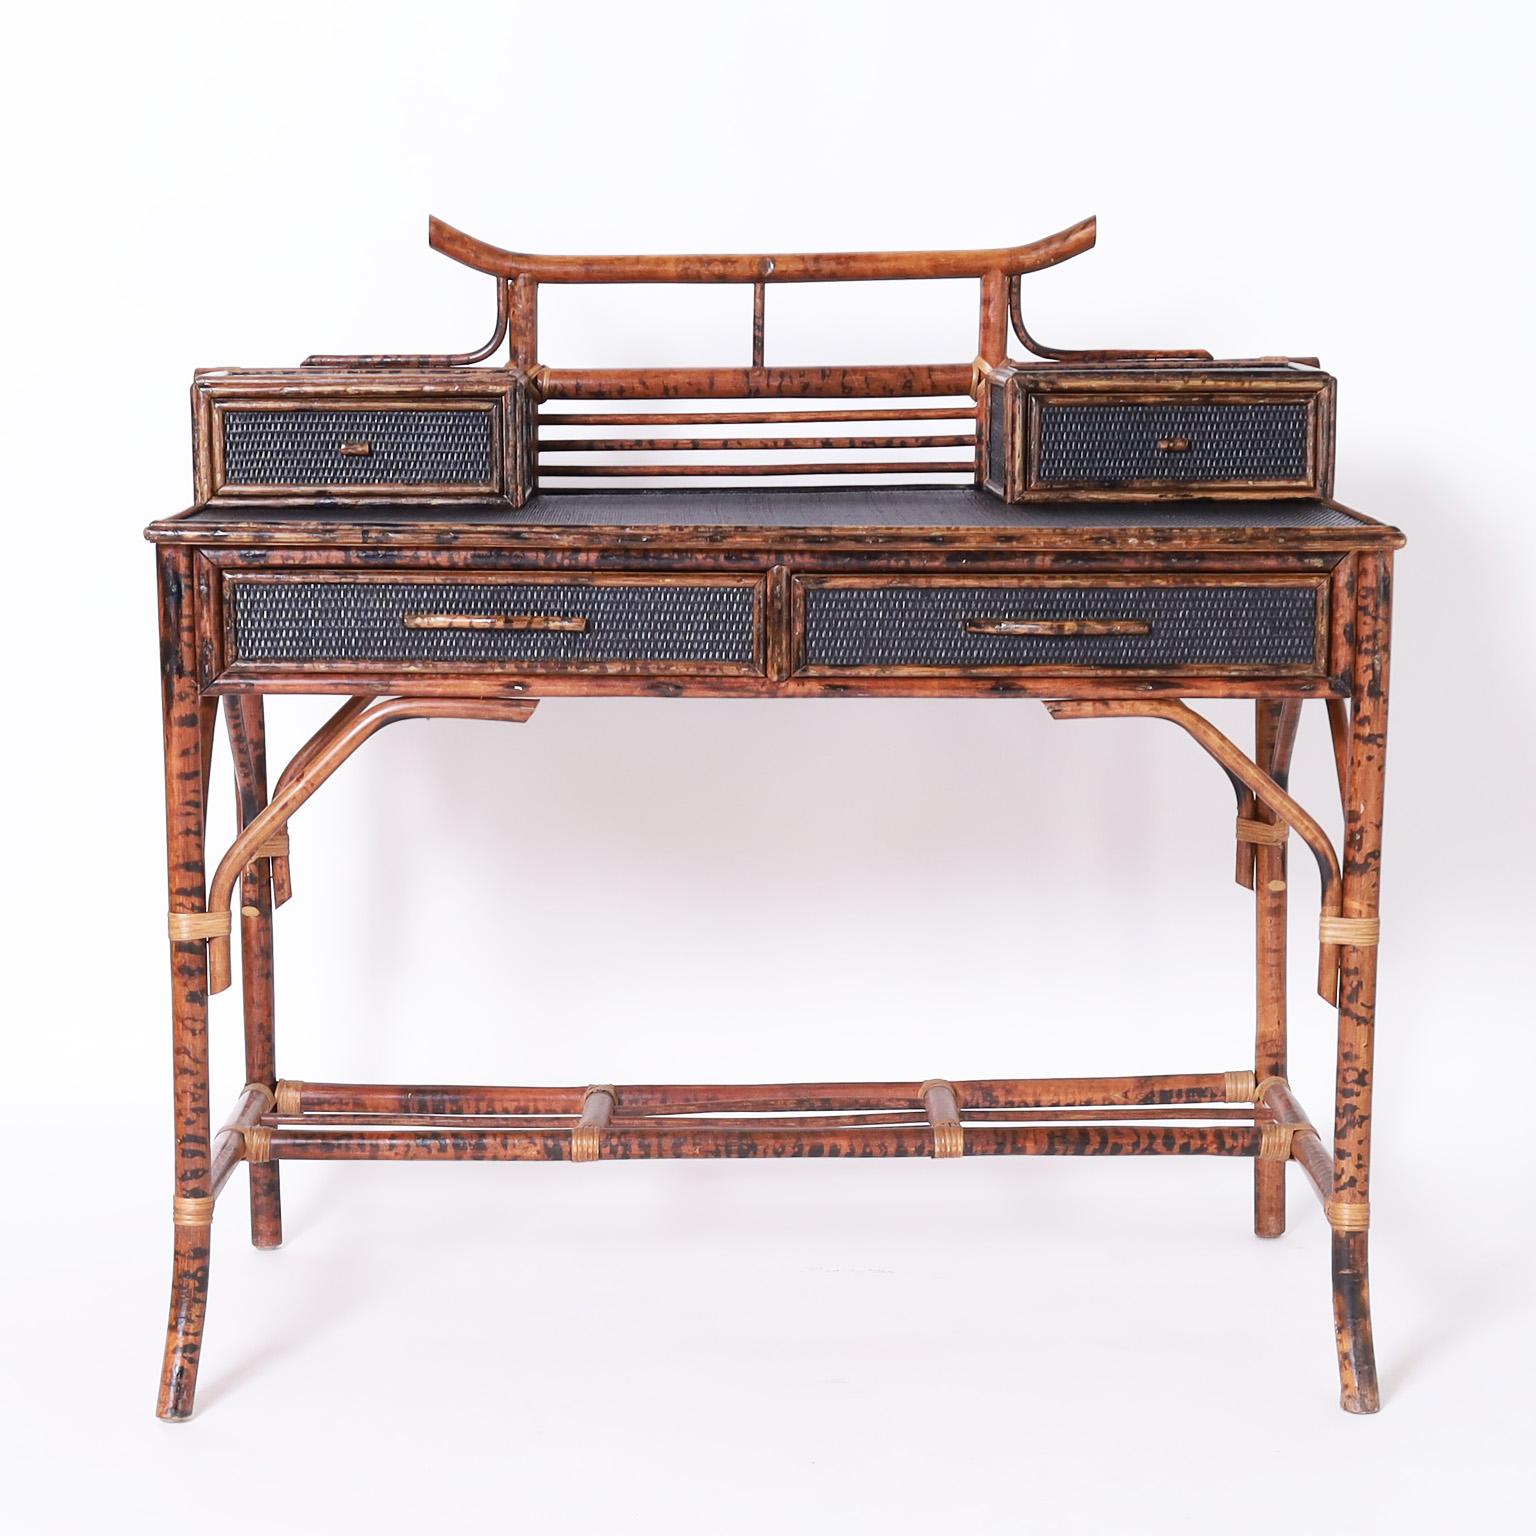 Vintage Asian modern British colonial style desk crafted with a bamboo frame and painted grasscloth panels featuring a pagoda form gallery, two glove boxes, two drawers in front and splayed legs.